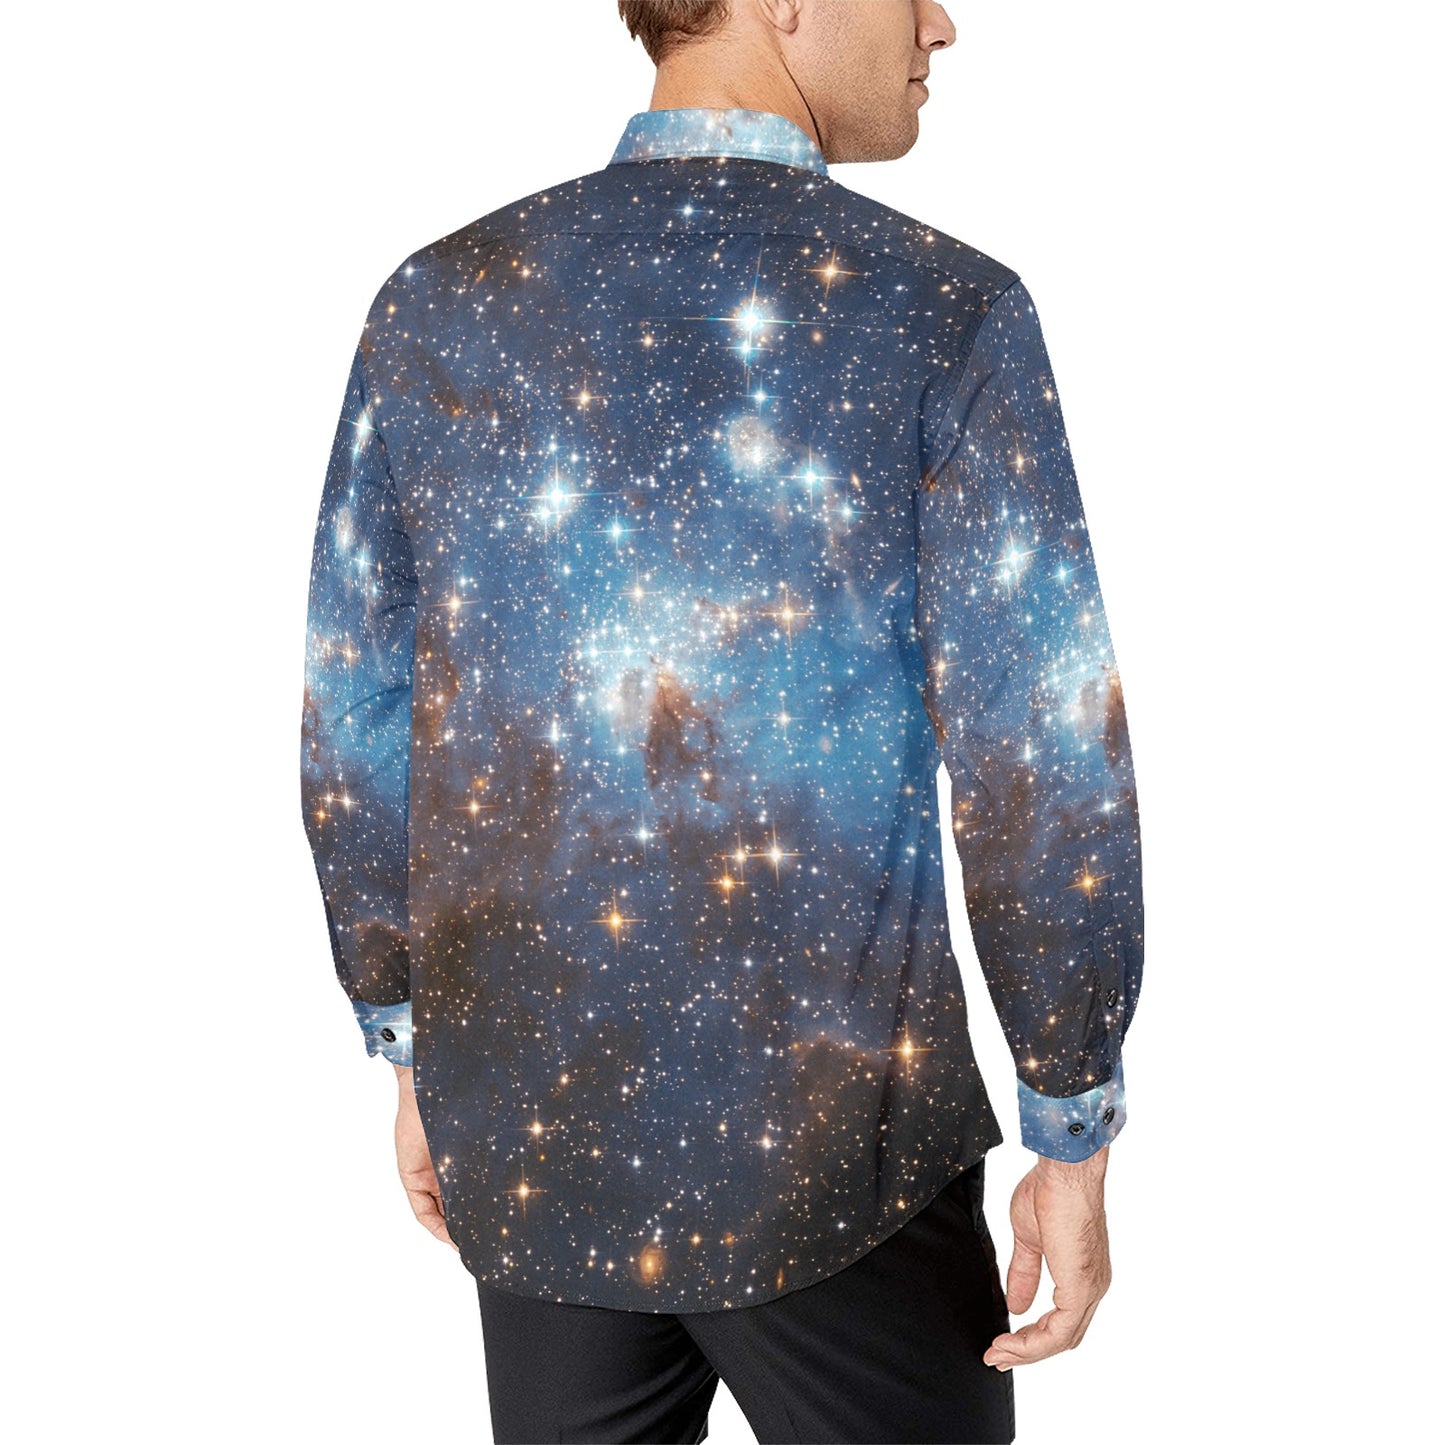 Galaxy Long Sleeve Men Button Up Shirt, Space Themed Stars Universe Cosmos Print Unique Buttoned Collar Dress Shirt with Chest Pocket Starcove Fashion